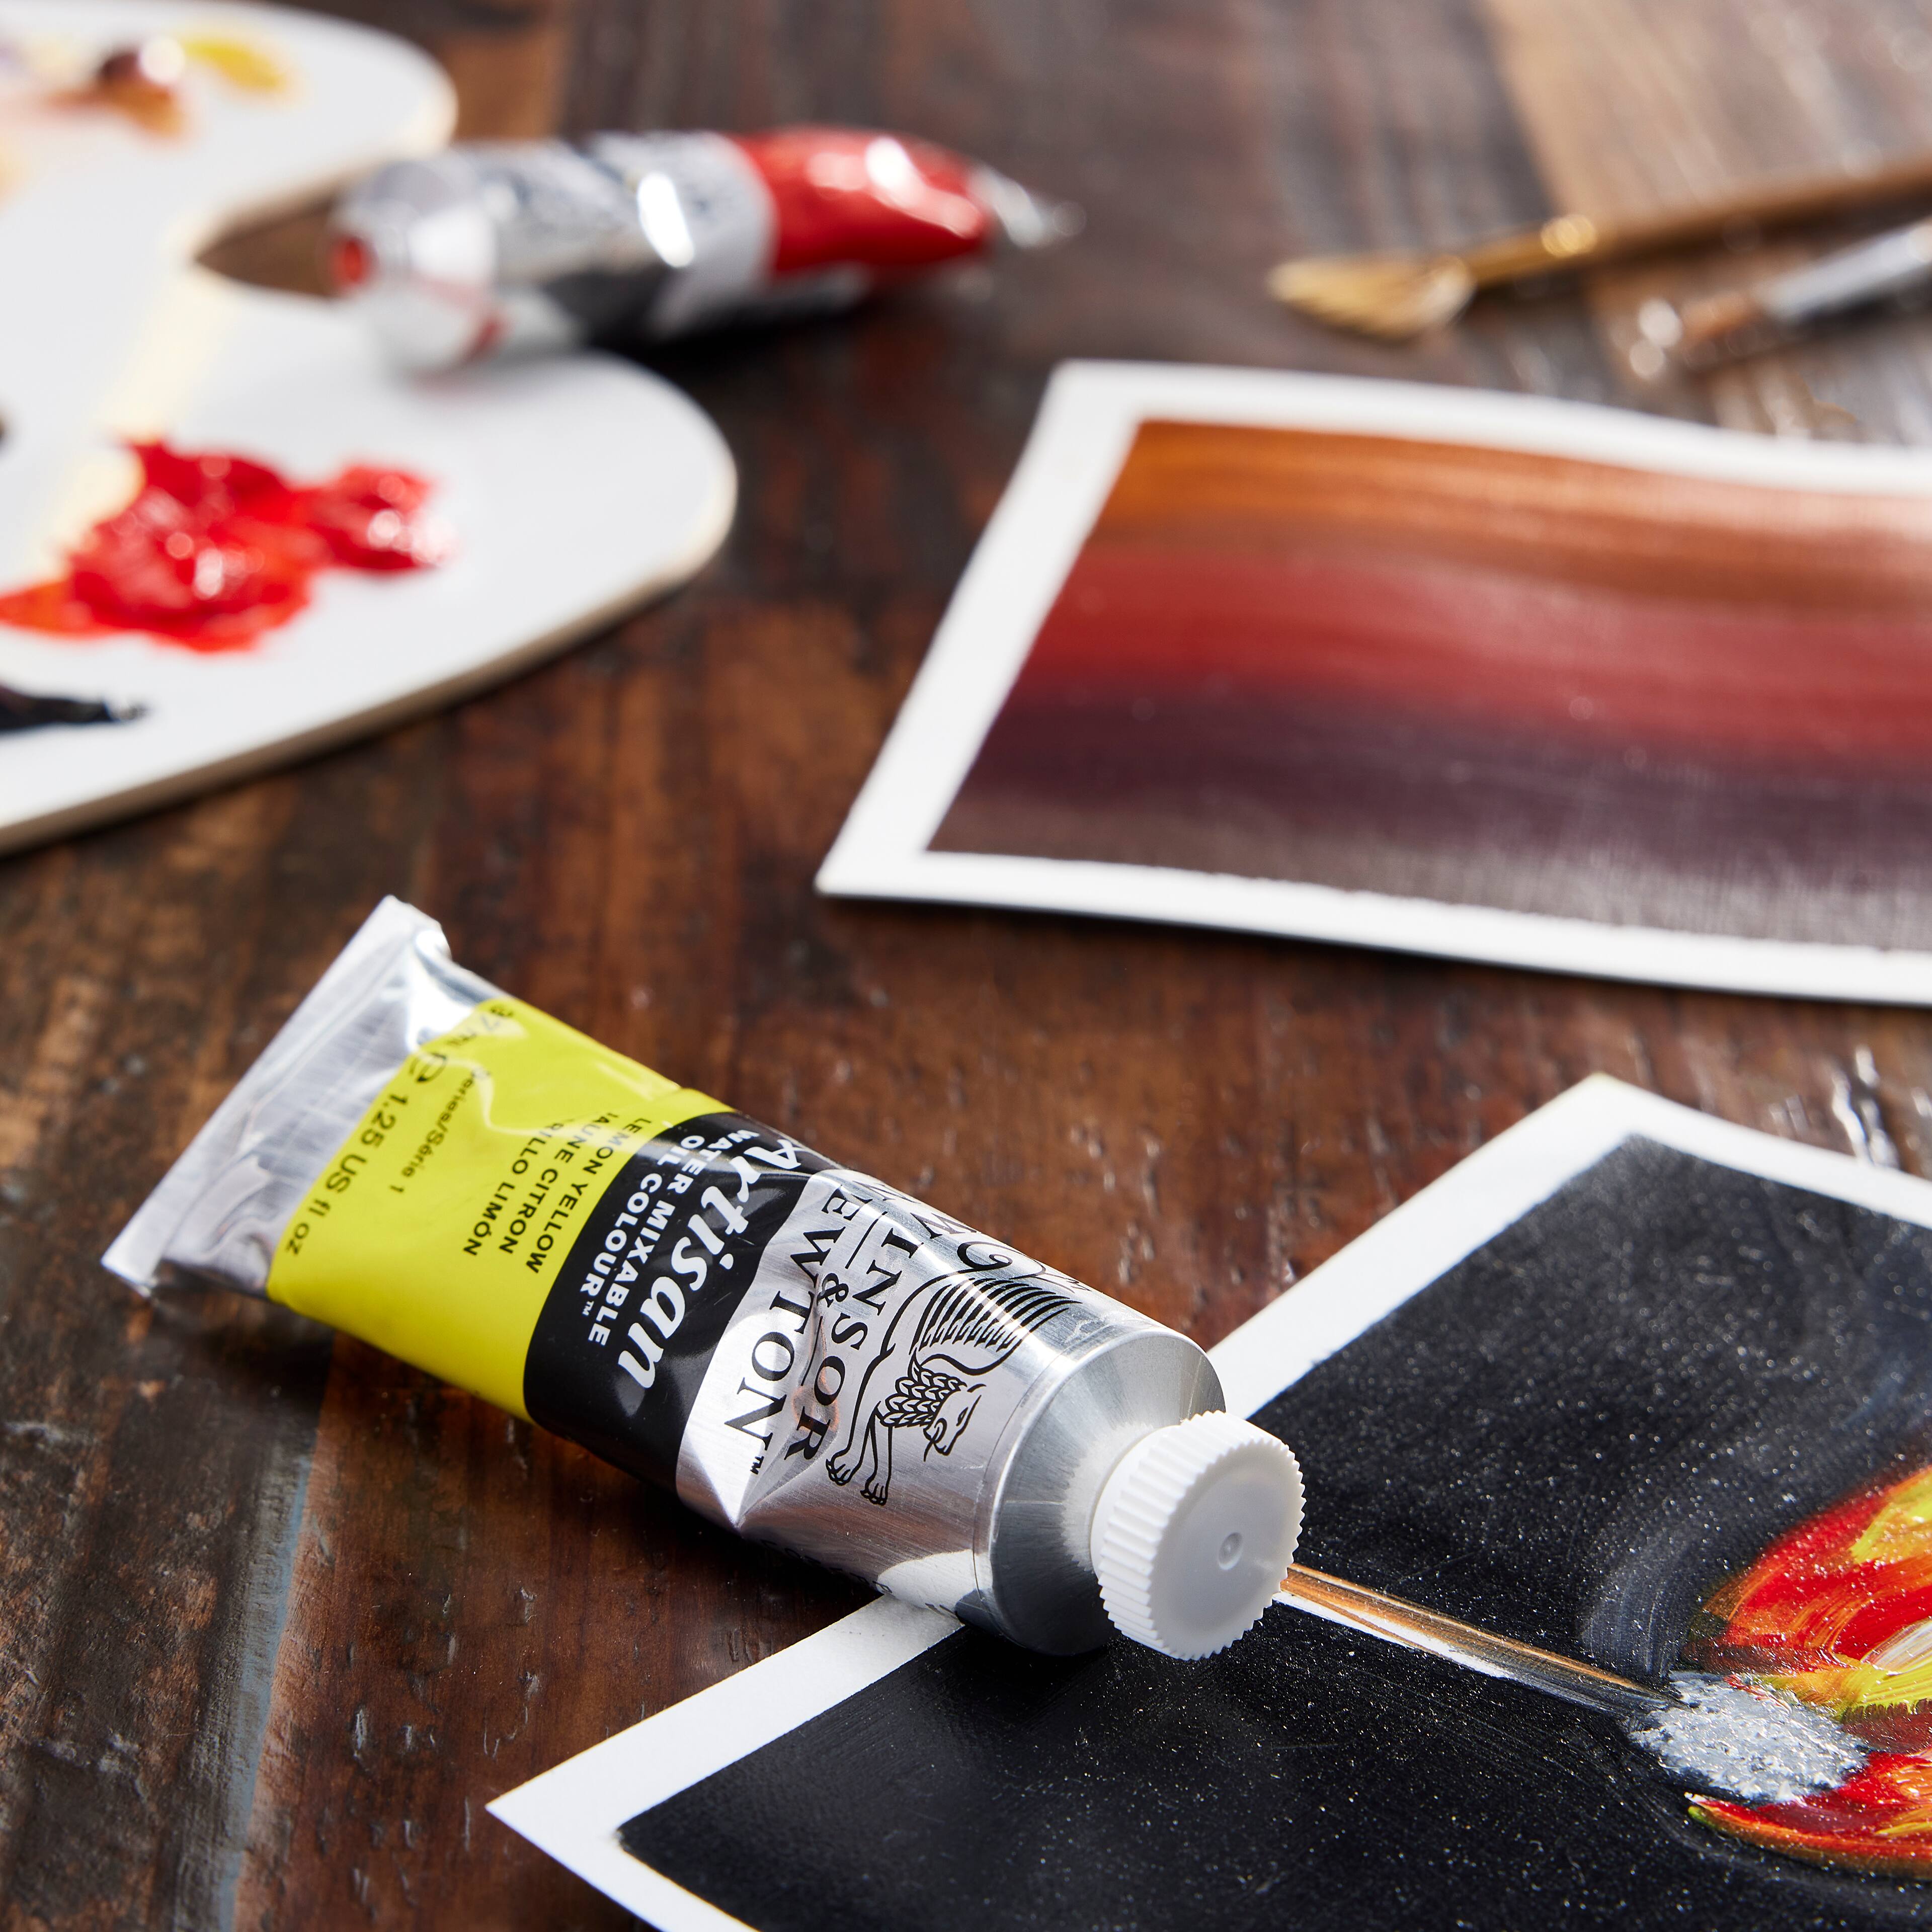 Winsor Newton Artisan Water Mixable Oil Color – little island crafts